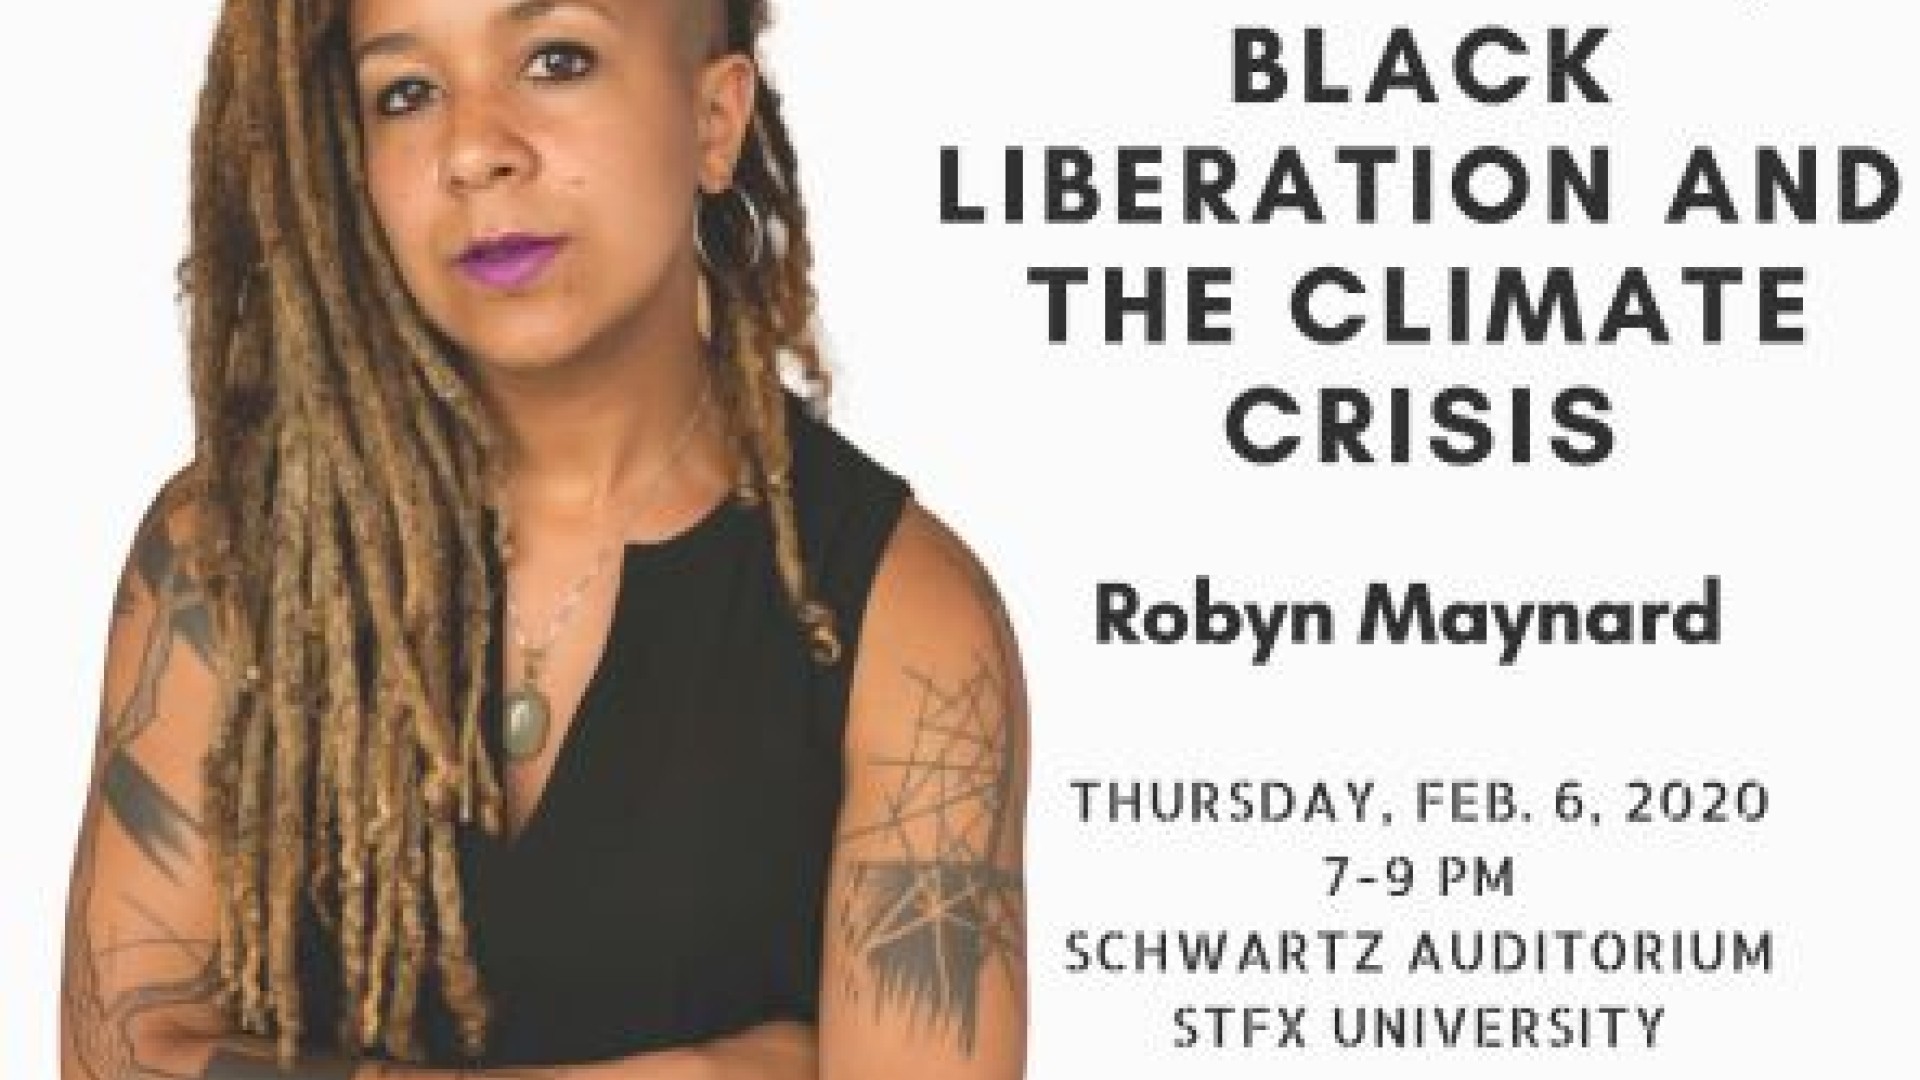 Poster: Black Life, Liberation And The Climate Crisis featuring Robyn Maynard